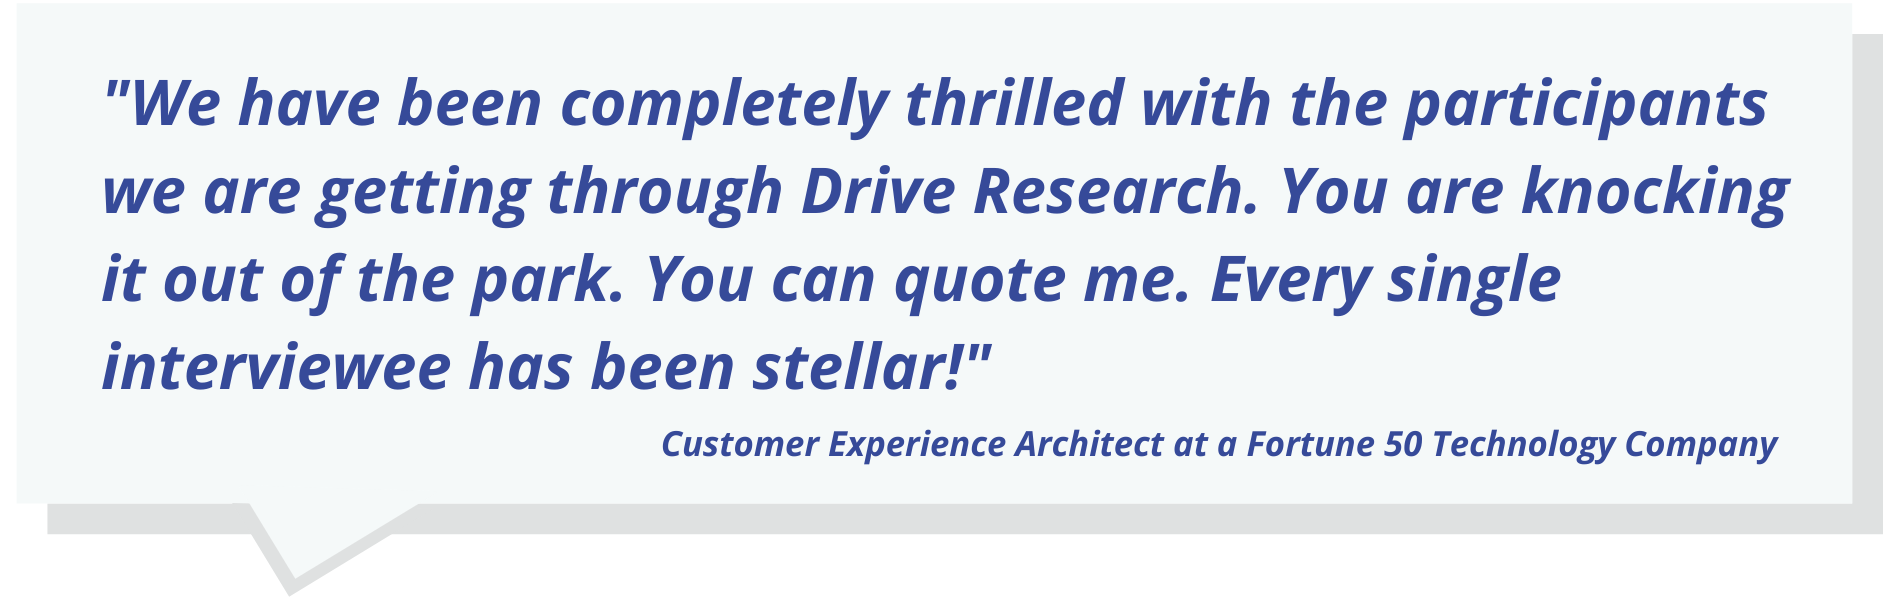 "We have been completely thrilled with the participants we are getting through Drive Research. You are knocking it out of the park. You can quote me. Every single interviewee has been stellar!"